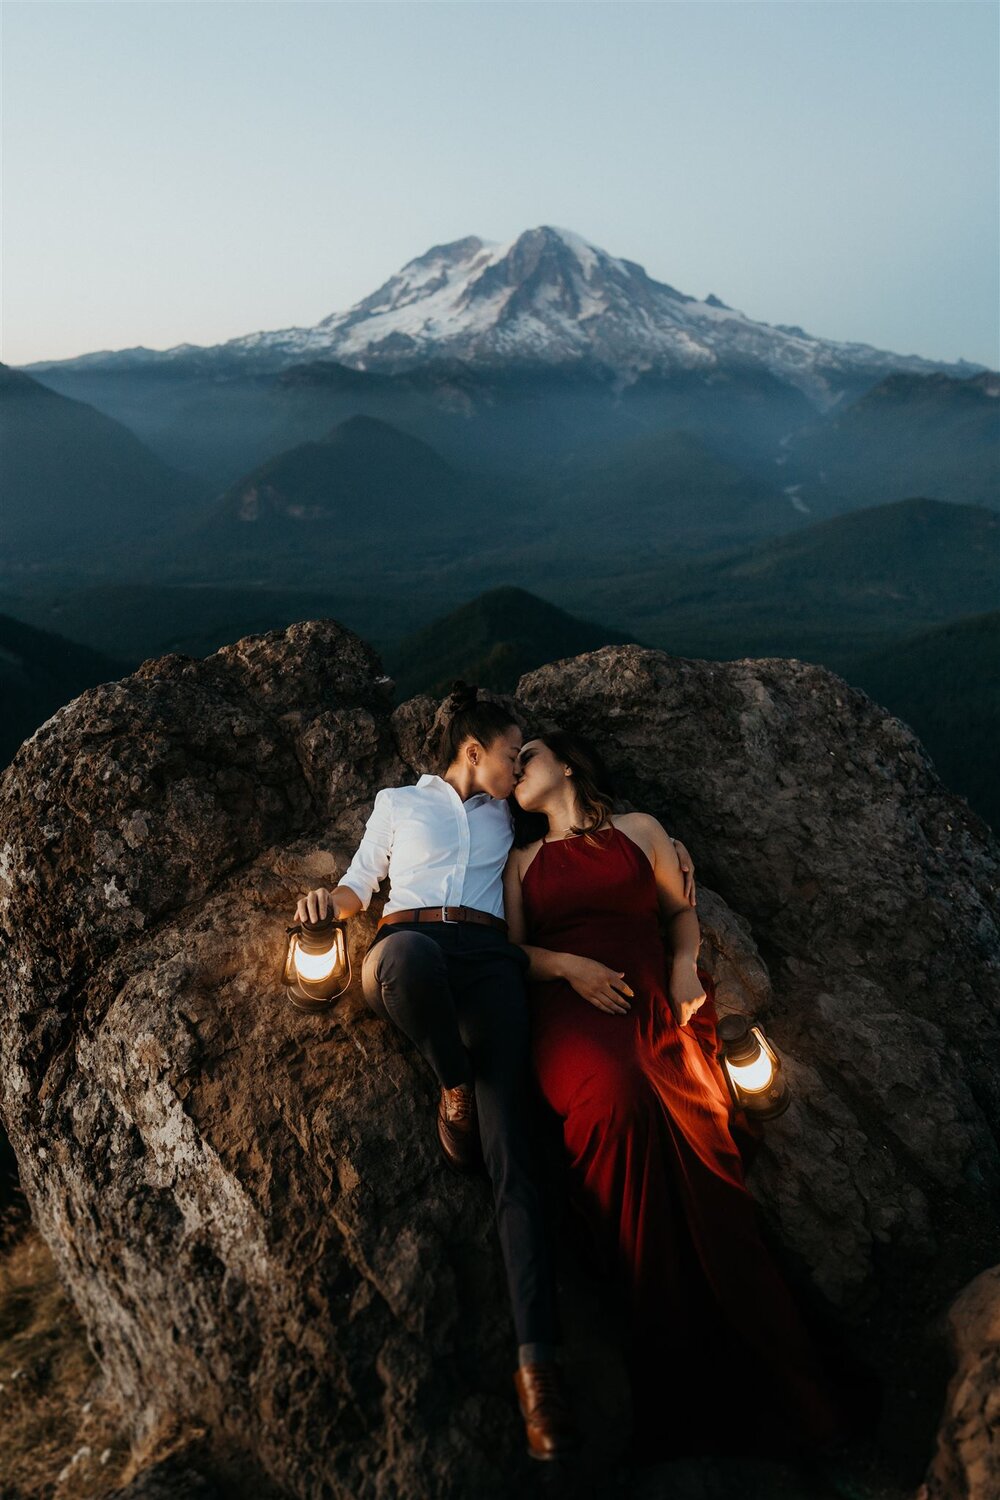 Best Places To Elope In Washington: Gifford Pinchot National Forest